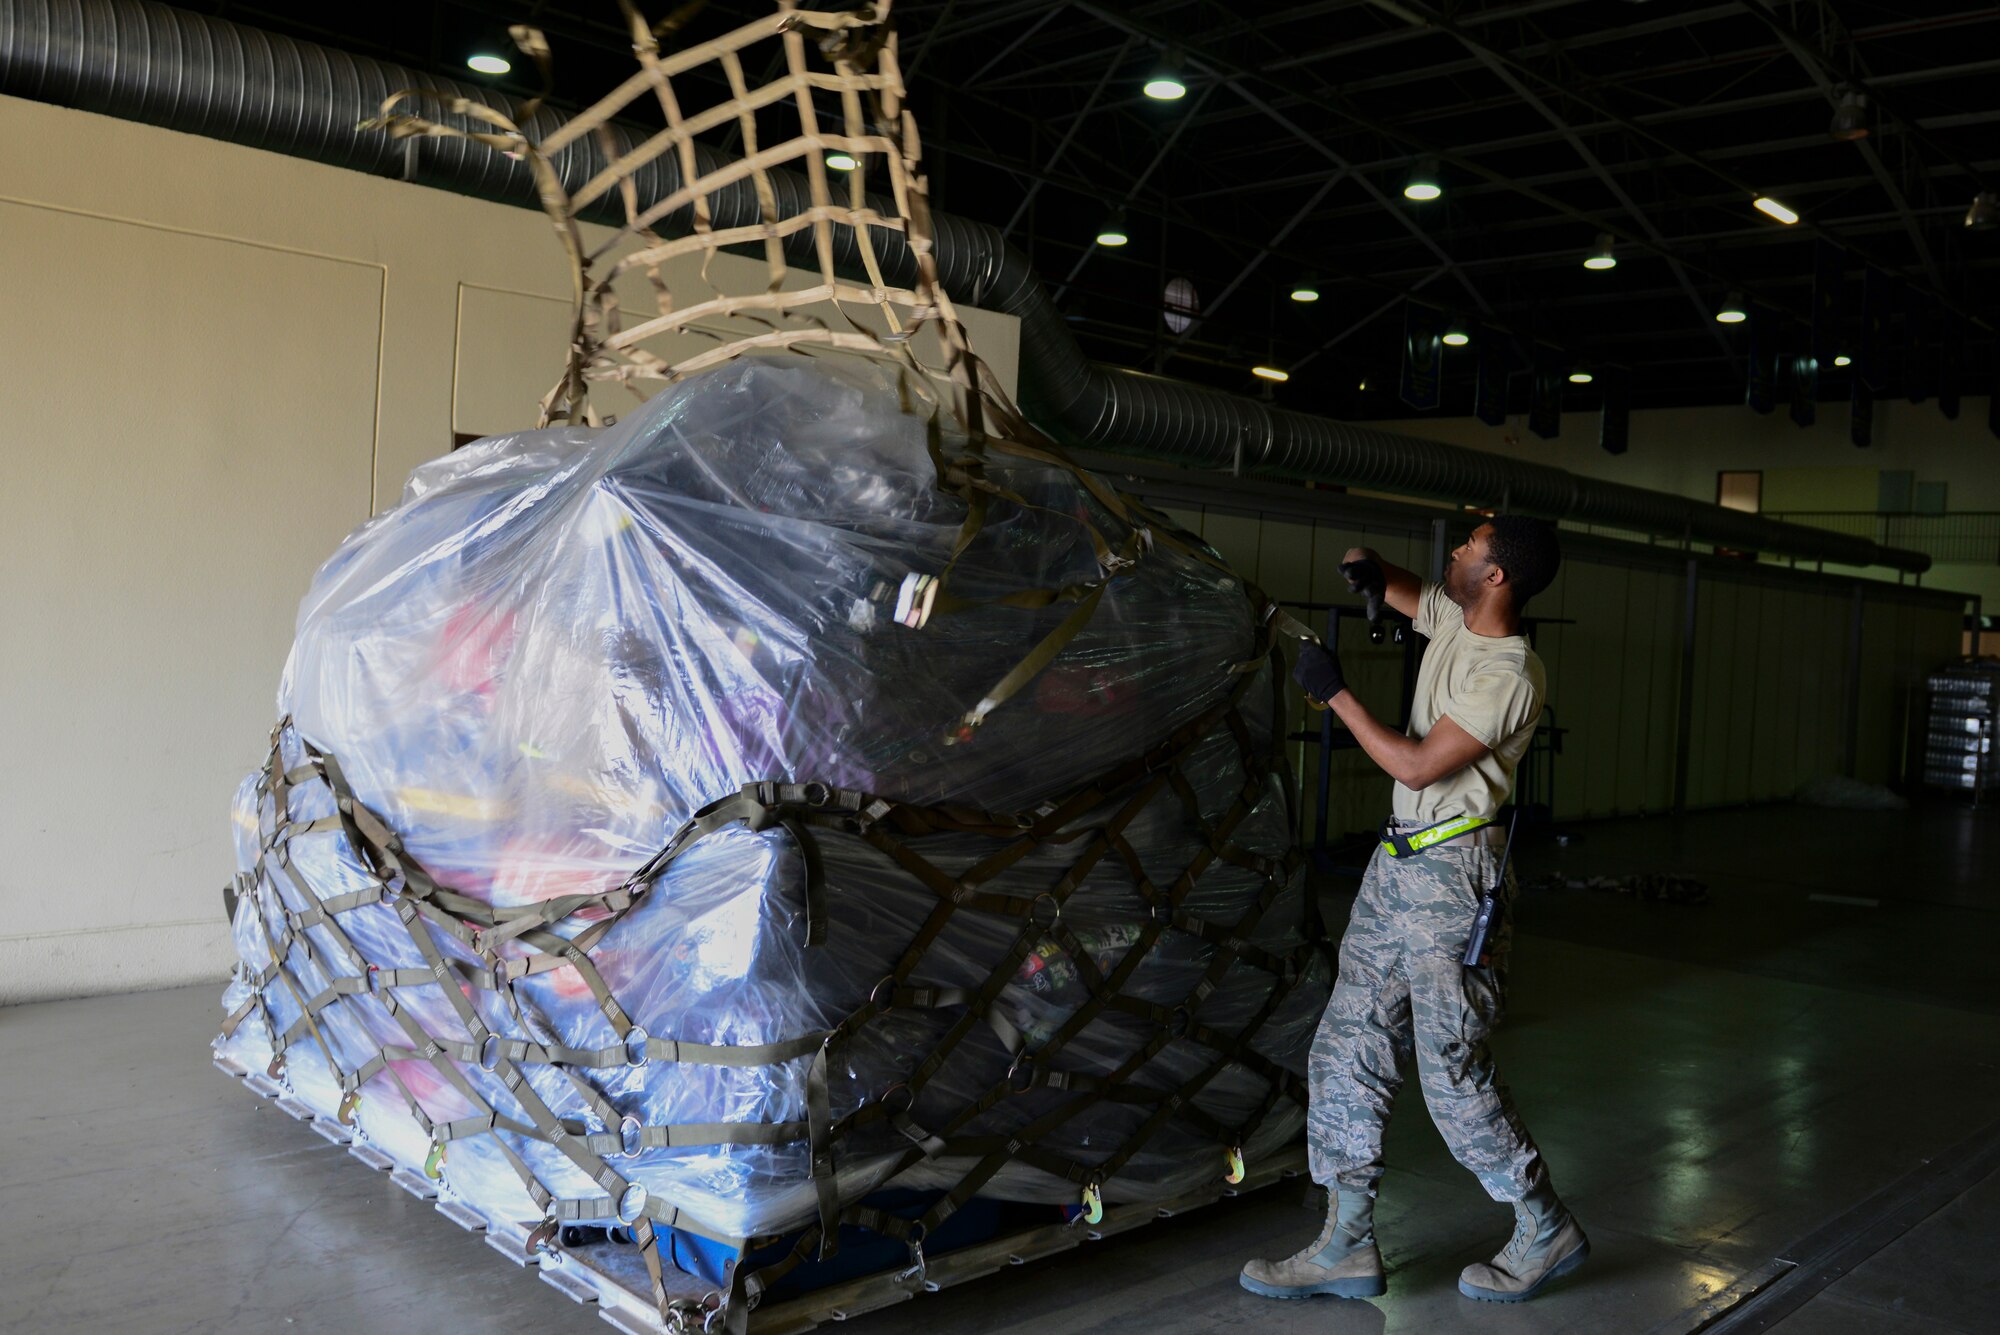 U.S. Air Force Airman Ennis Roberson, 728th Air Mobility Squadron aircraft service apprentice, throws a tie-down net over a pallet of luggage, March 31, 2016, at Incirlik Air Base, Turkey. Pallets were built and staged to load in aircraft for Department of Defense dependents assigned to Incirlik AB. (U.S. Air Force photo by Staff Sgt. Caleb Pierce/Released)